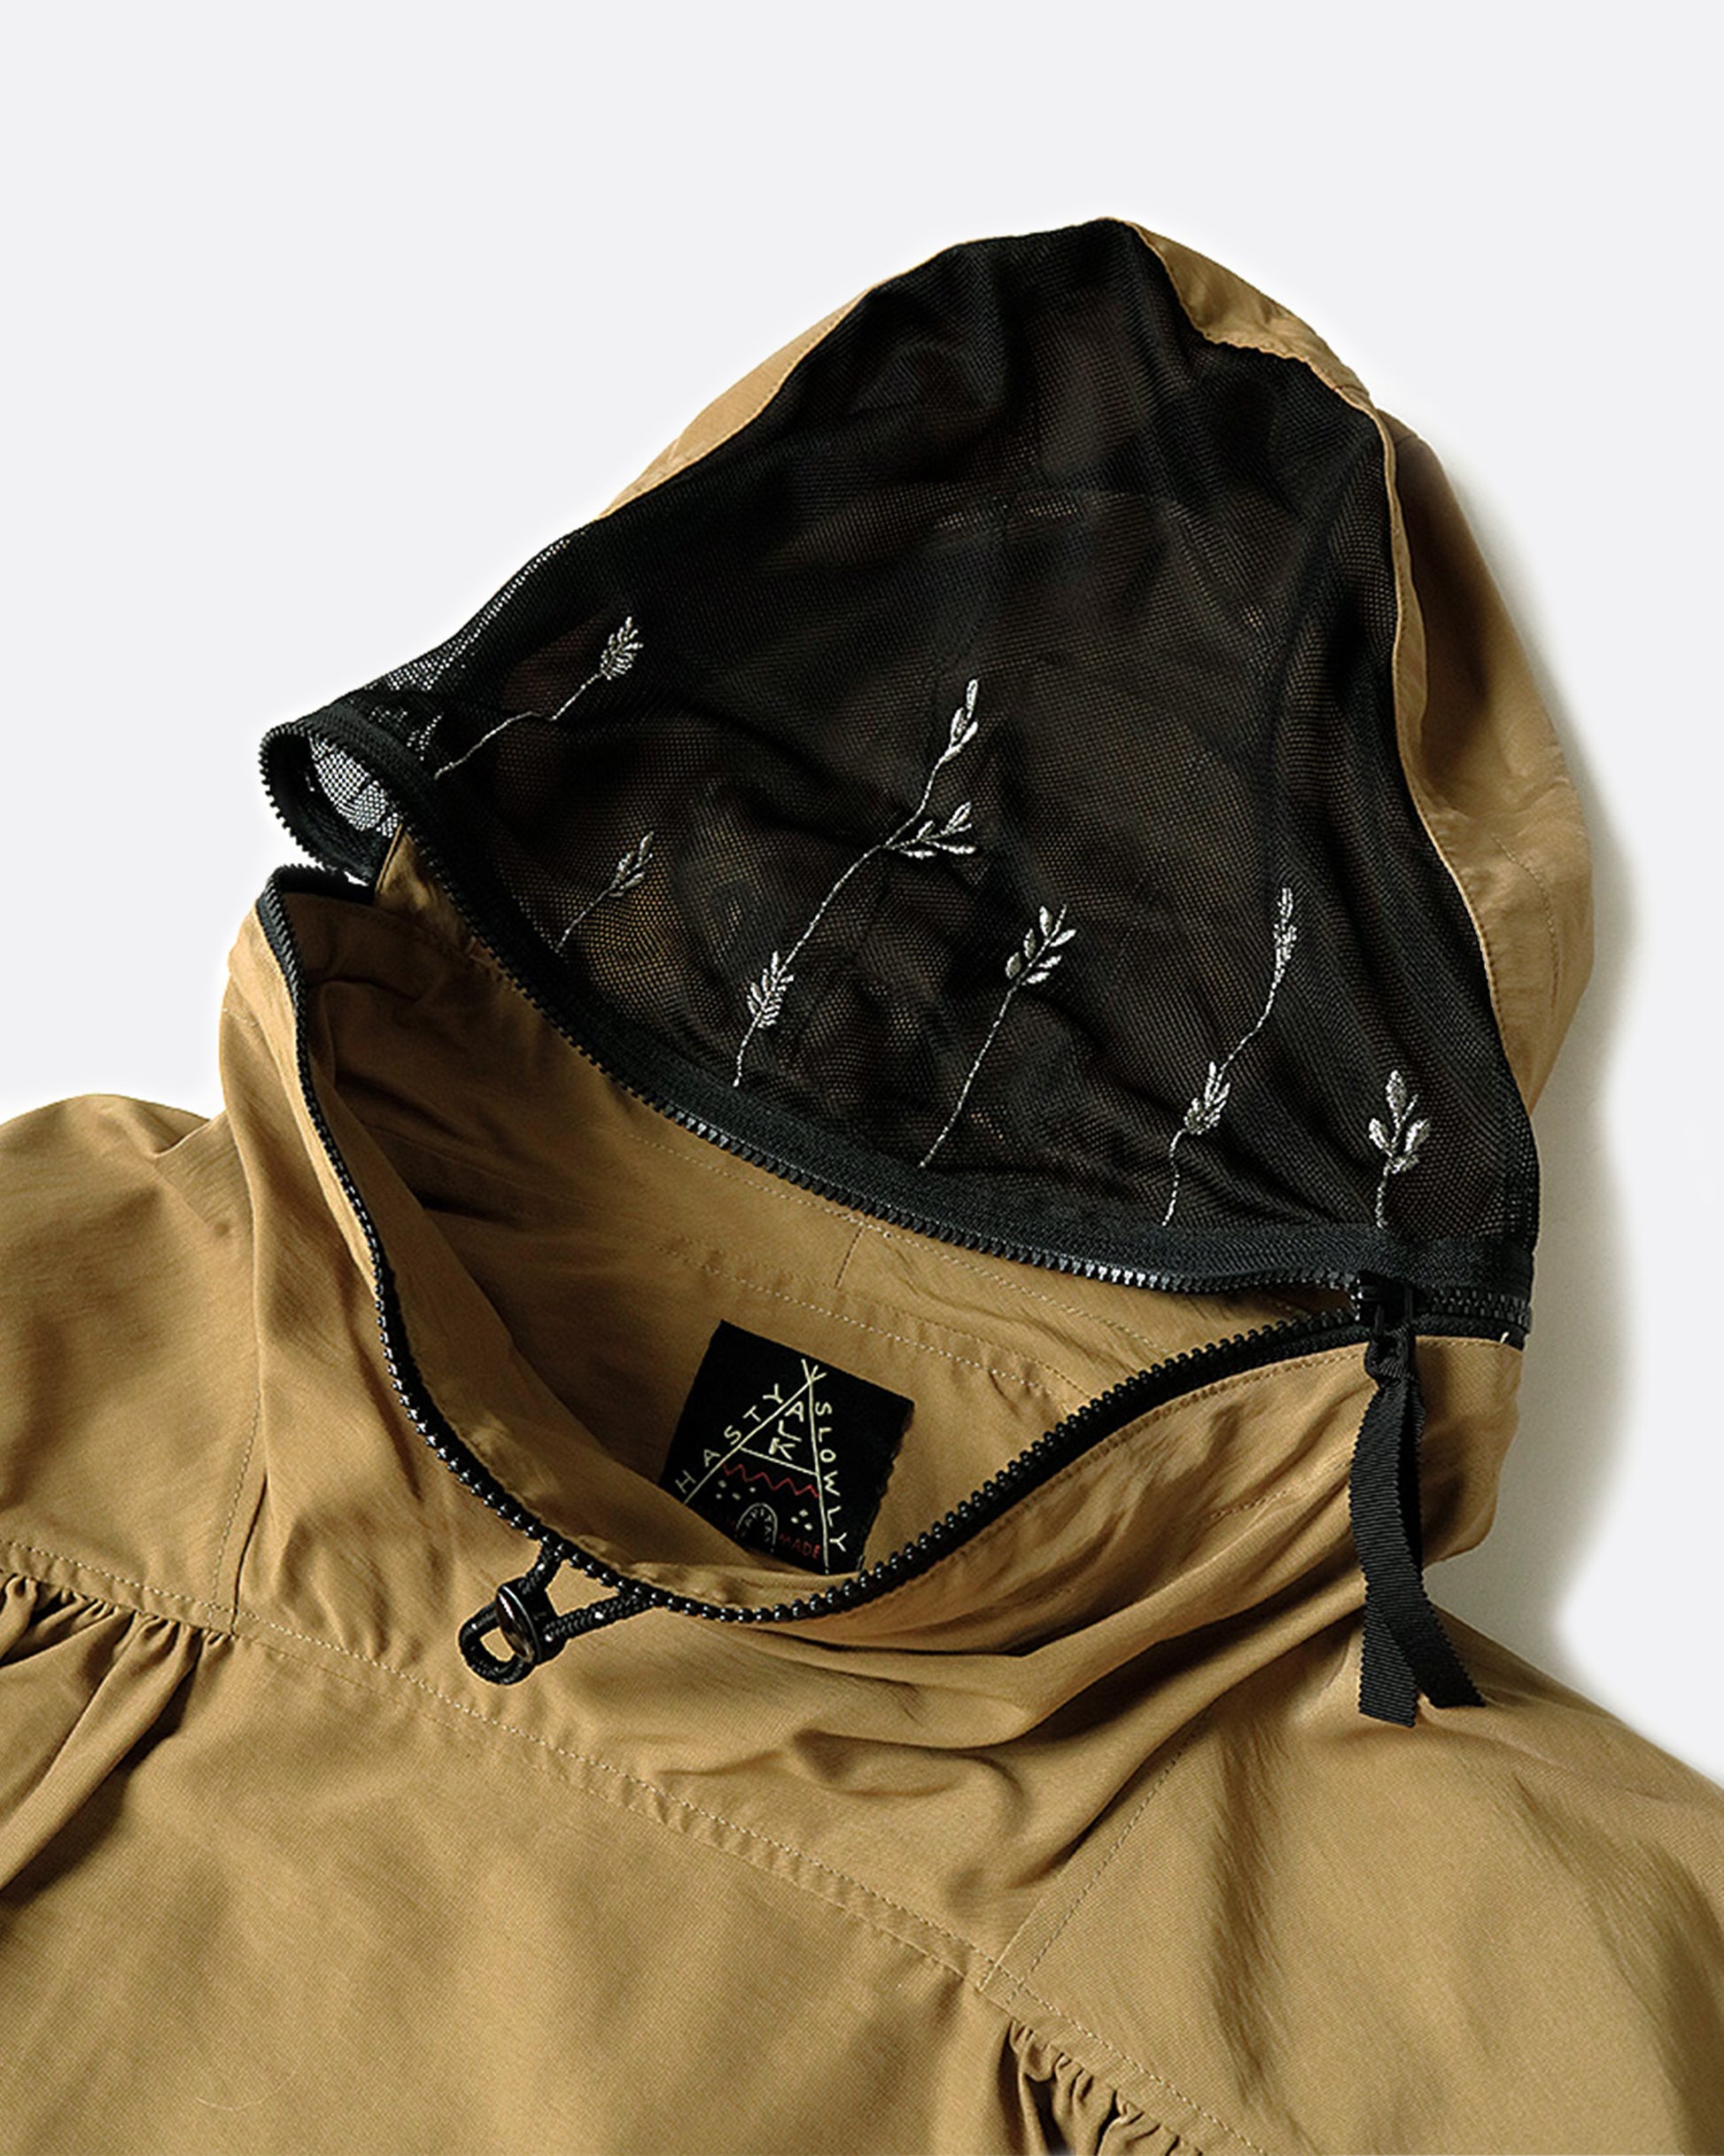 A 60/40 cloth pullover jacket with embroidered mesh panels on the front and back of the hood.